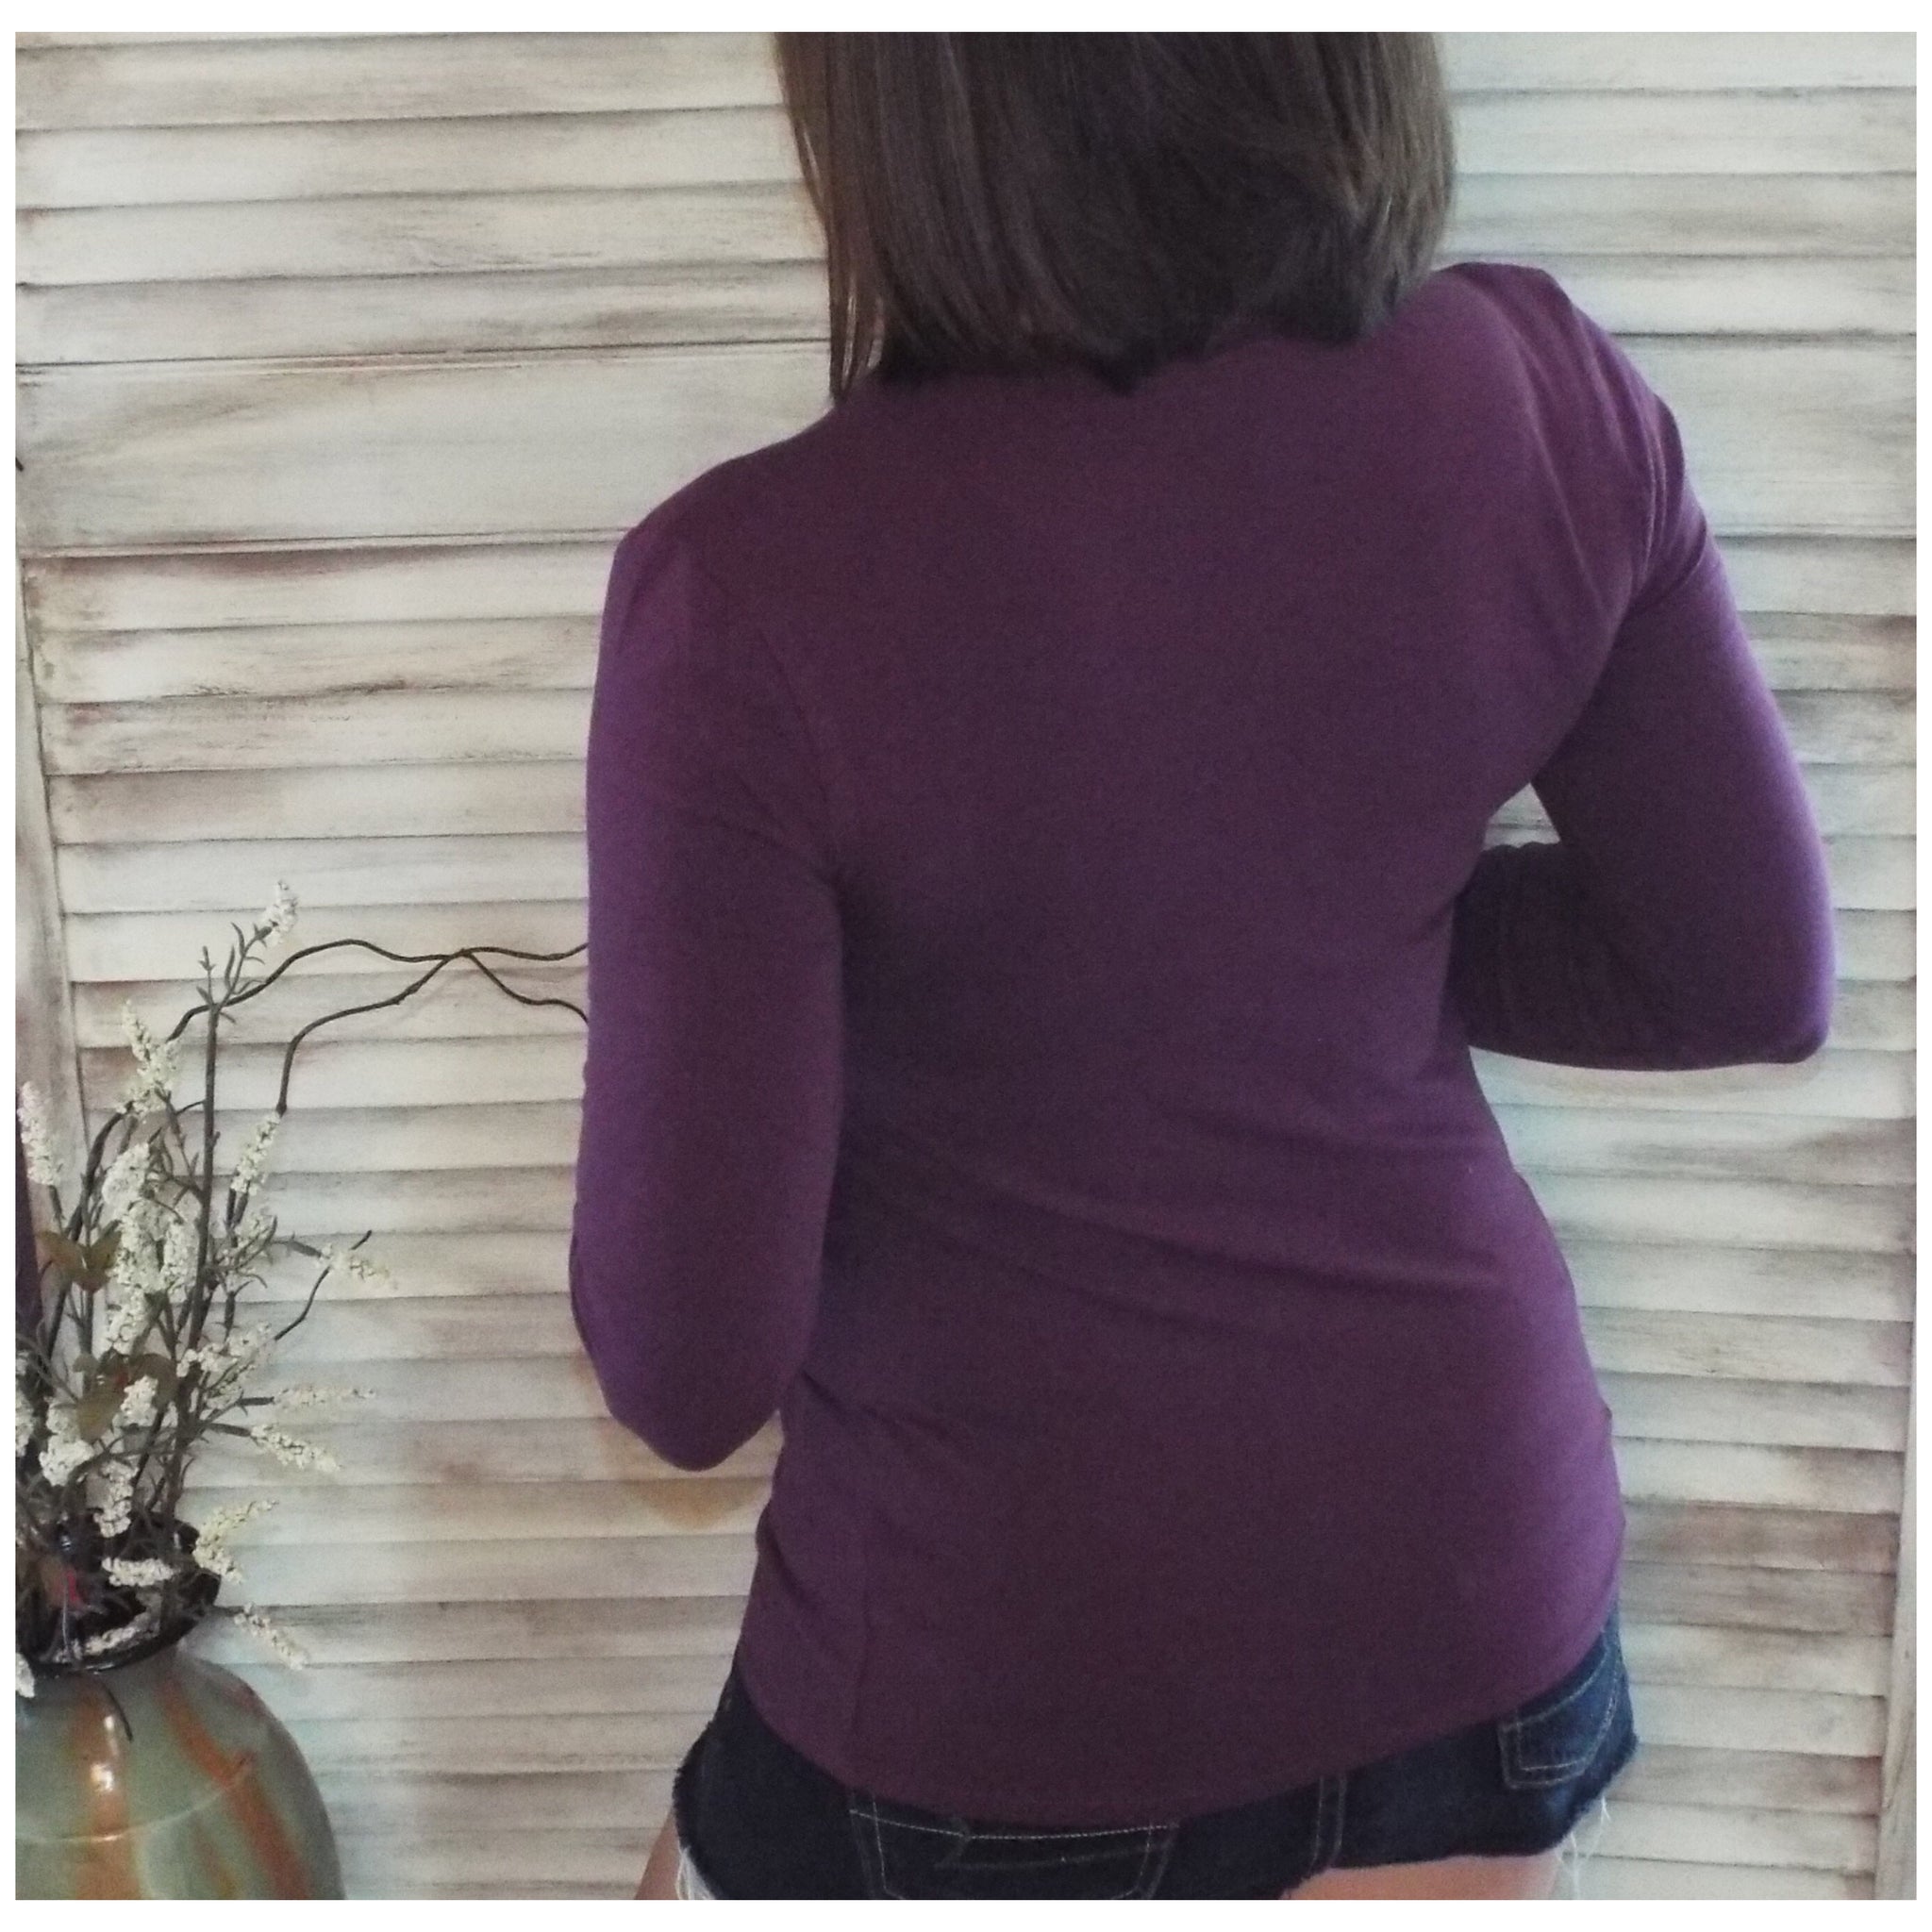 Slimming Round Neck Low Cut Long Sleeve Tissue Basic Baby Shirt Top Eggplant